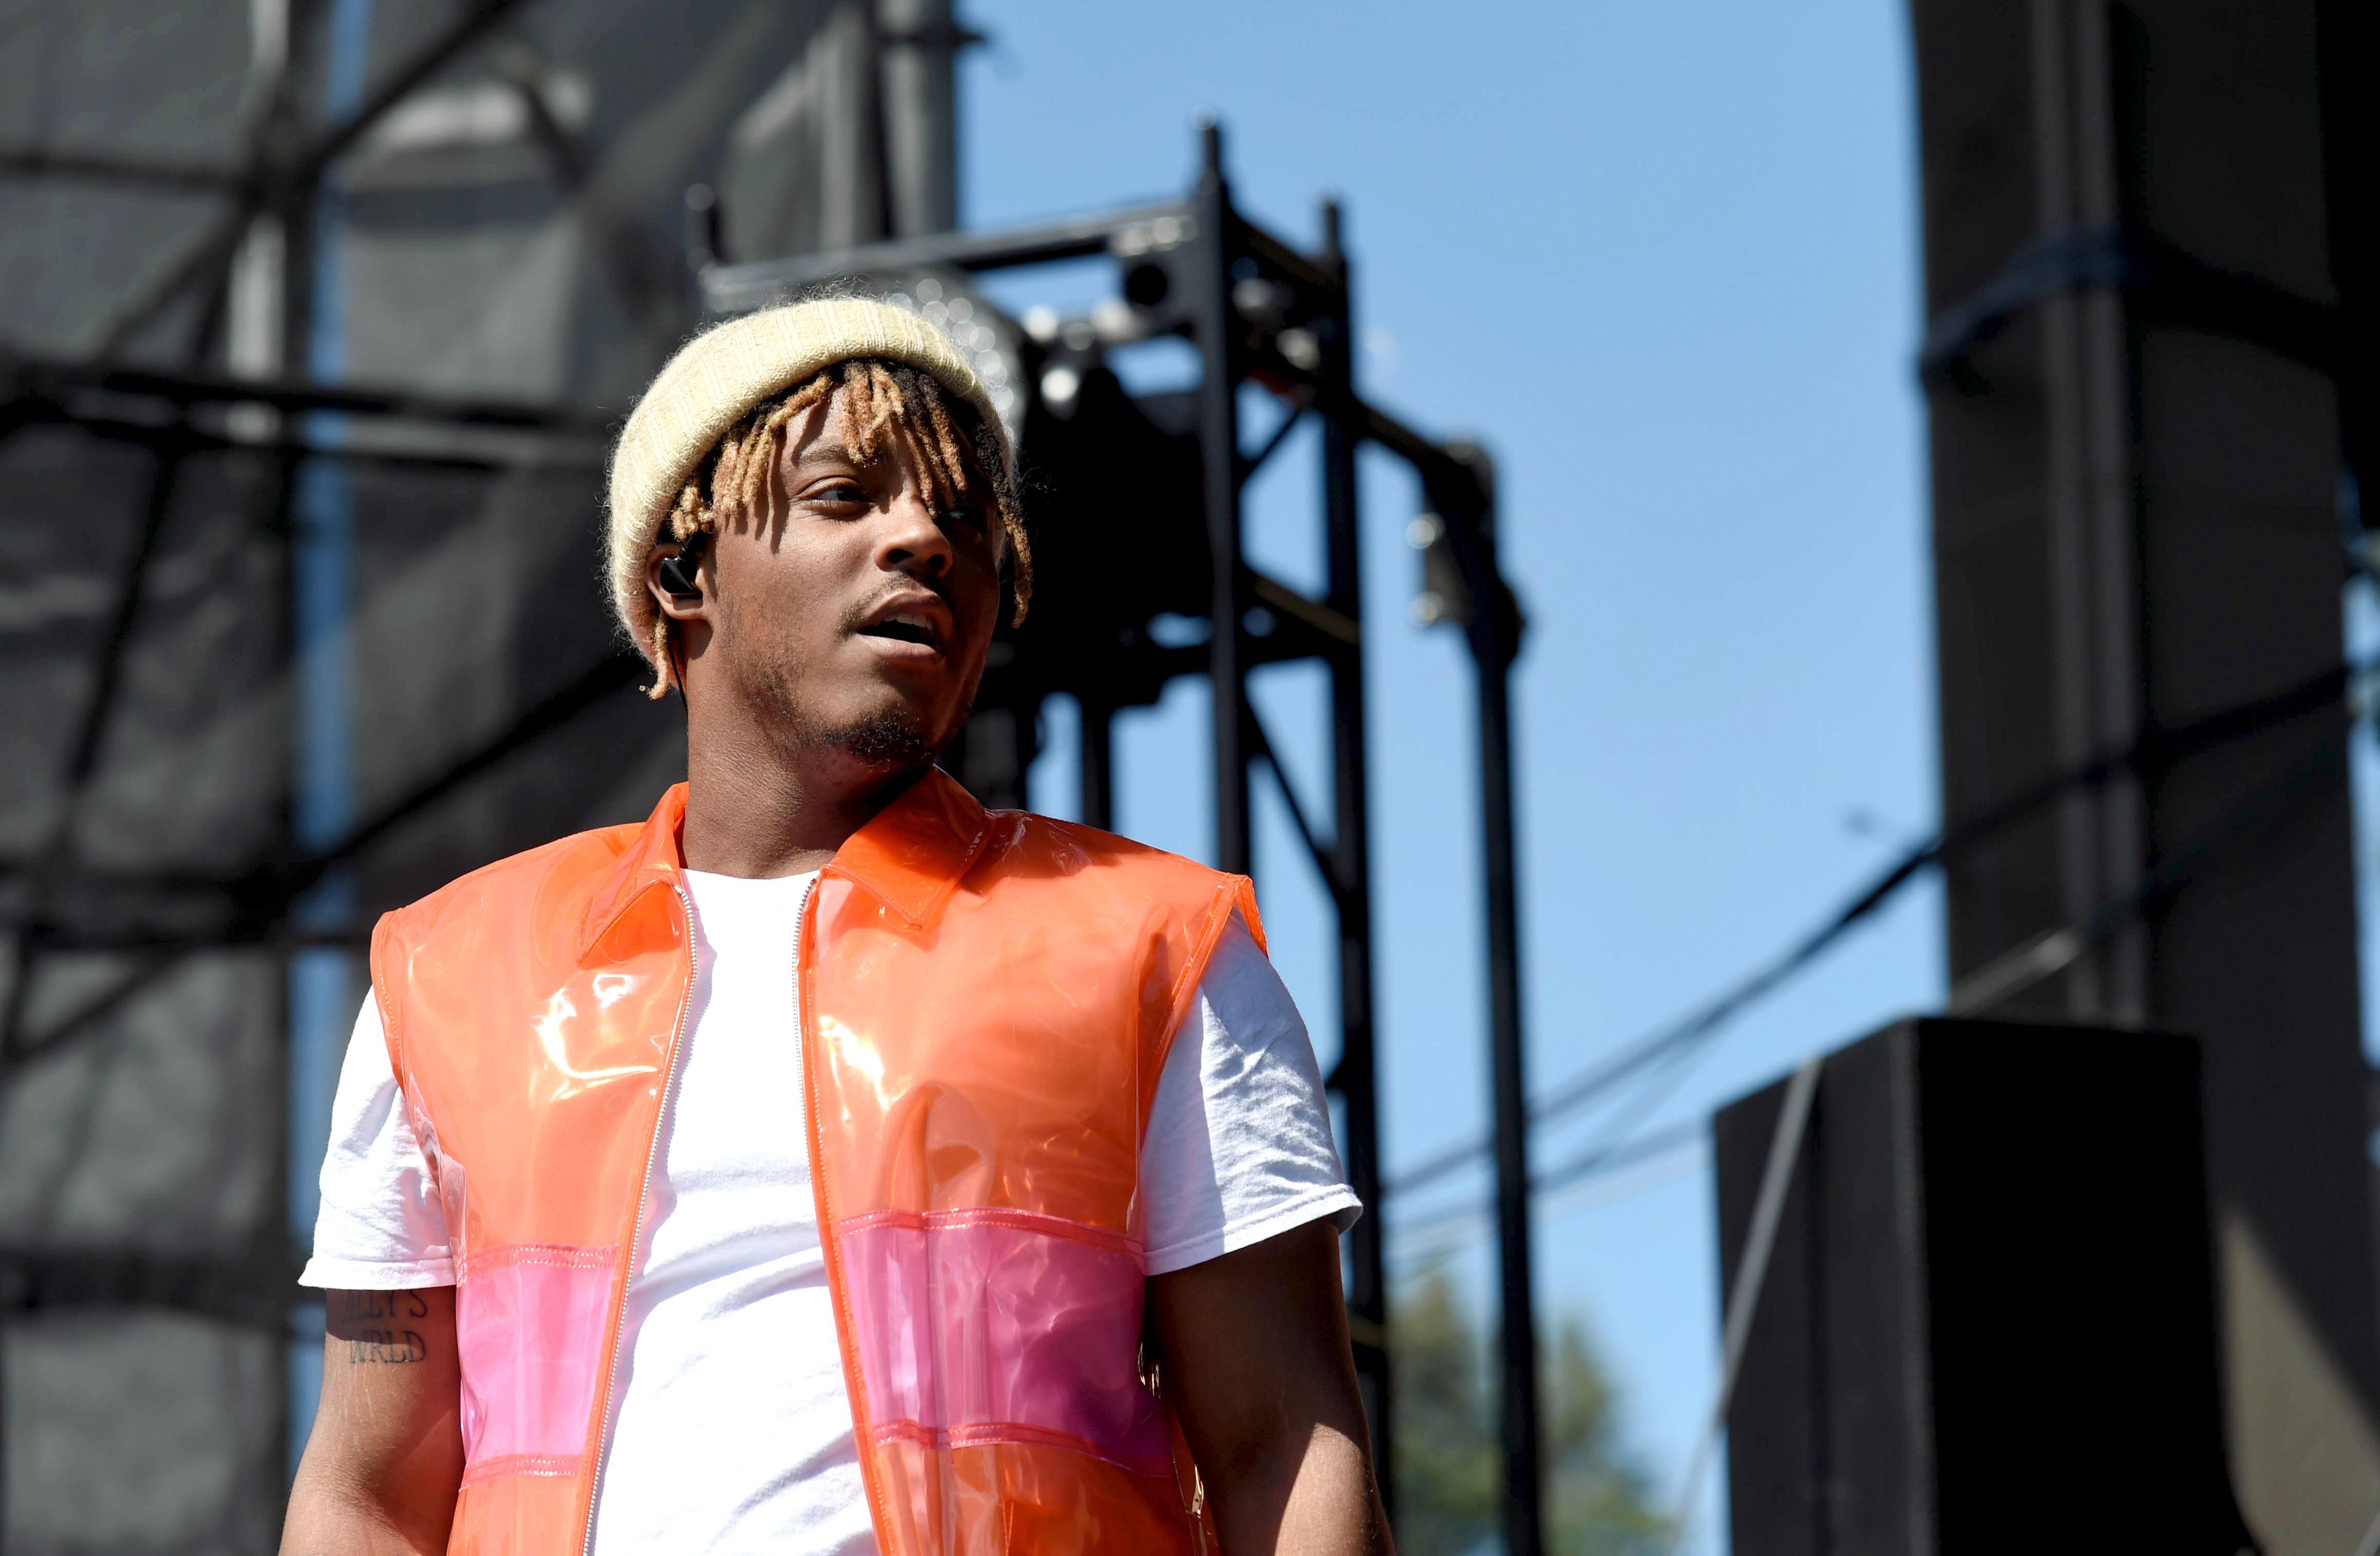 Juice WRLD died after swallowing pills as feds searched plane for guns,  drugs (reports) 